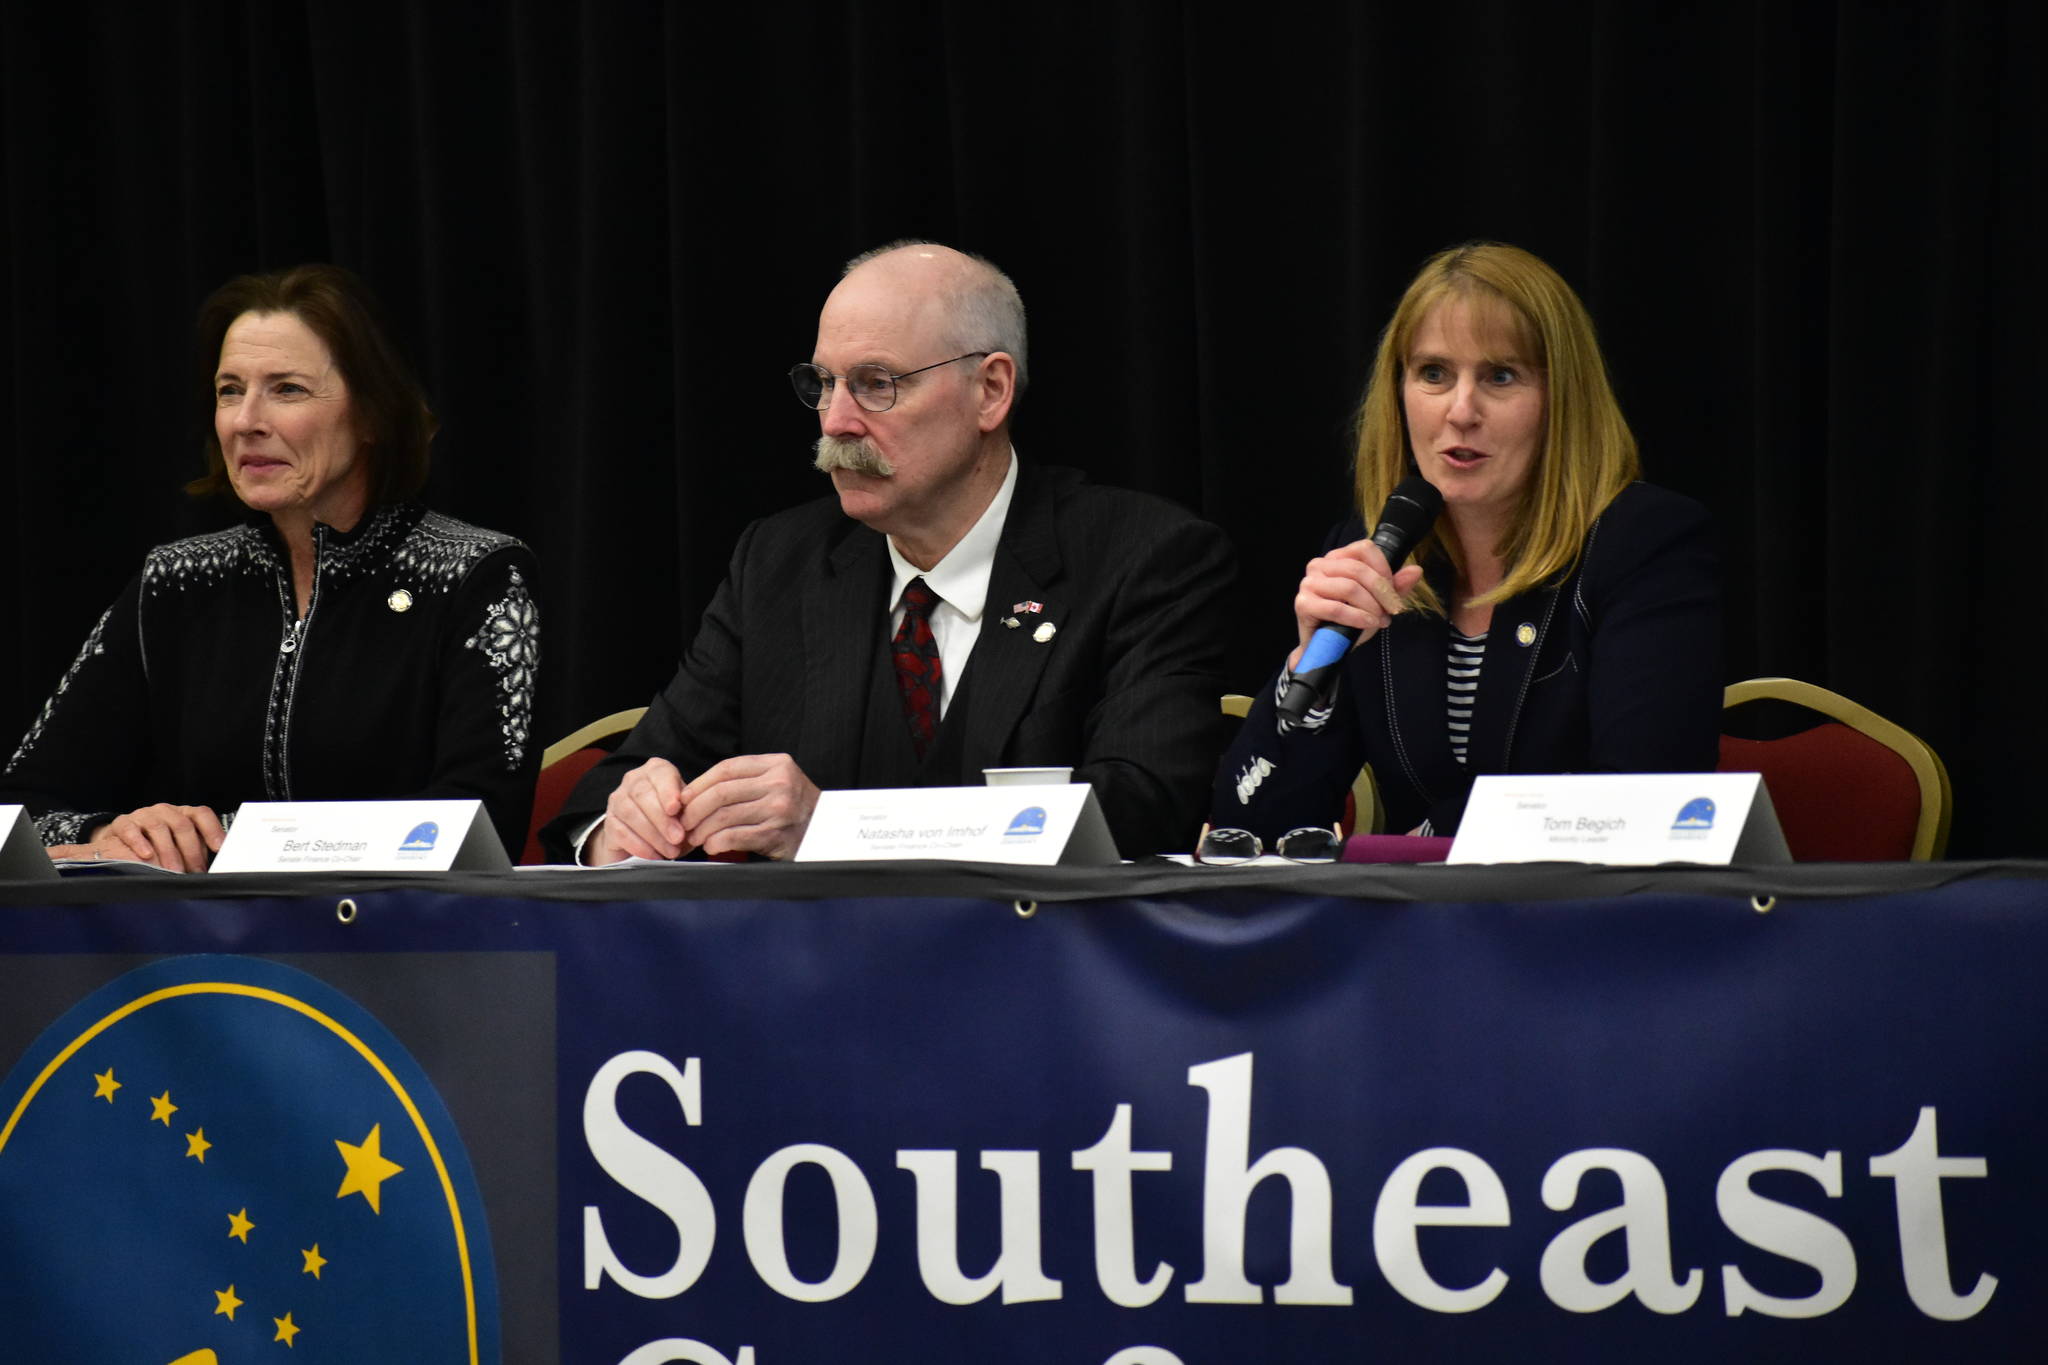 From left to right: Senate President Cathy Giessel, R-Anchorage, Sen. Bert Stedman, R-Sitka and Sen. Natasha Von Imhof, R-Anchorage, speak at the Southeast Conference mis-session summit at Elizabeth Peratovich Hall on Tuesday, Feb. 4, 2020. (Peter Segall |Juneau Empire)